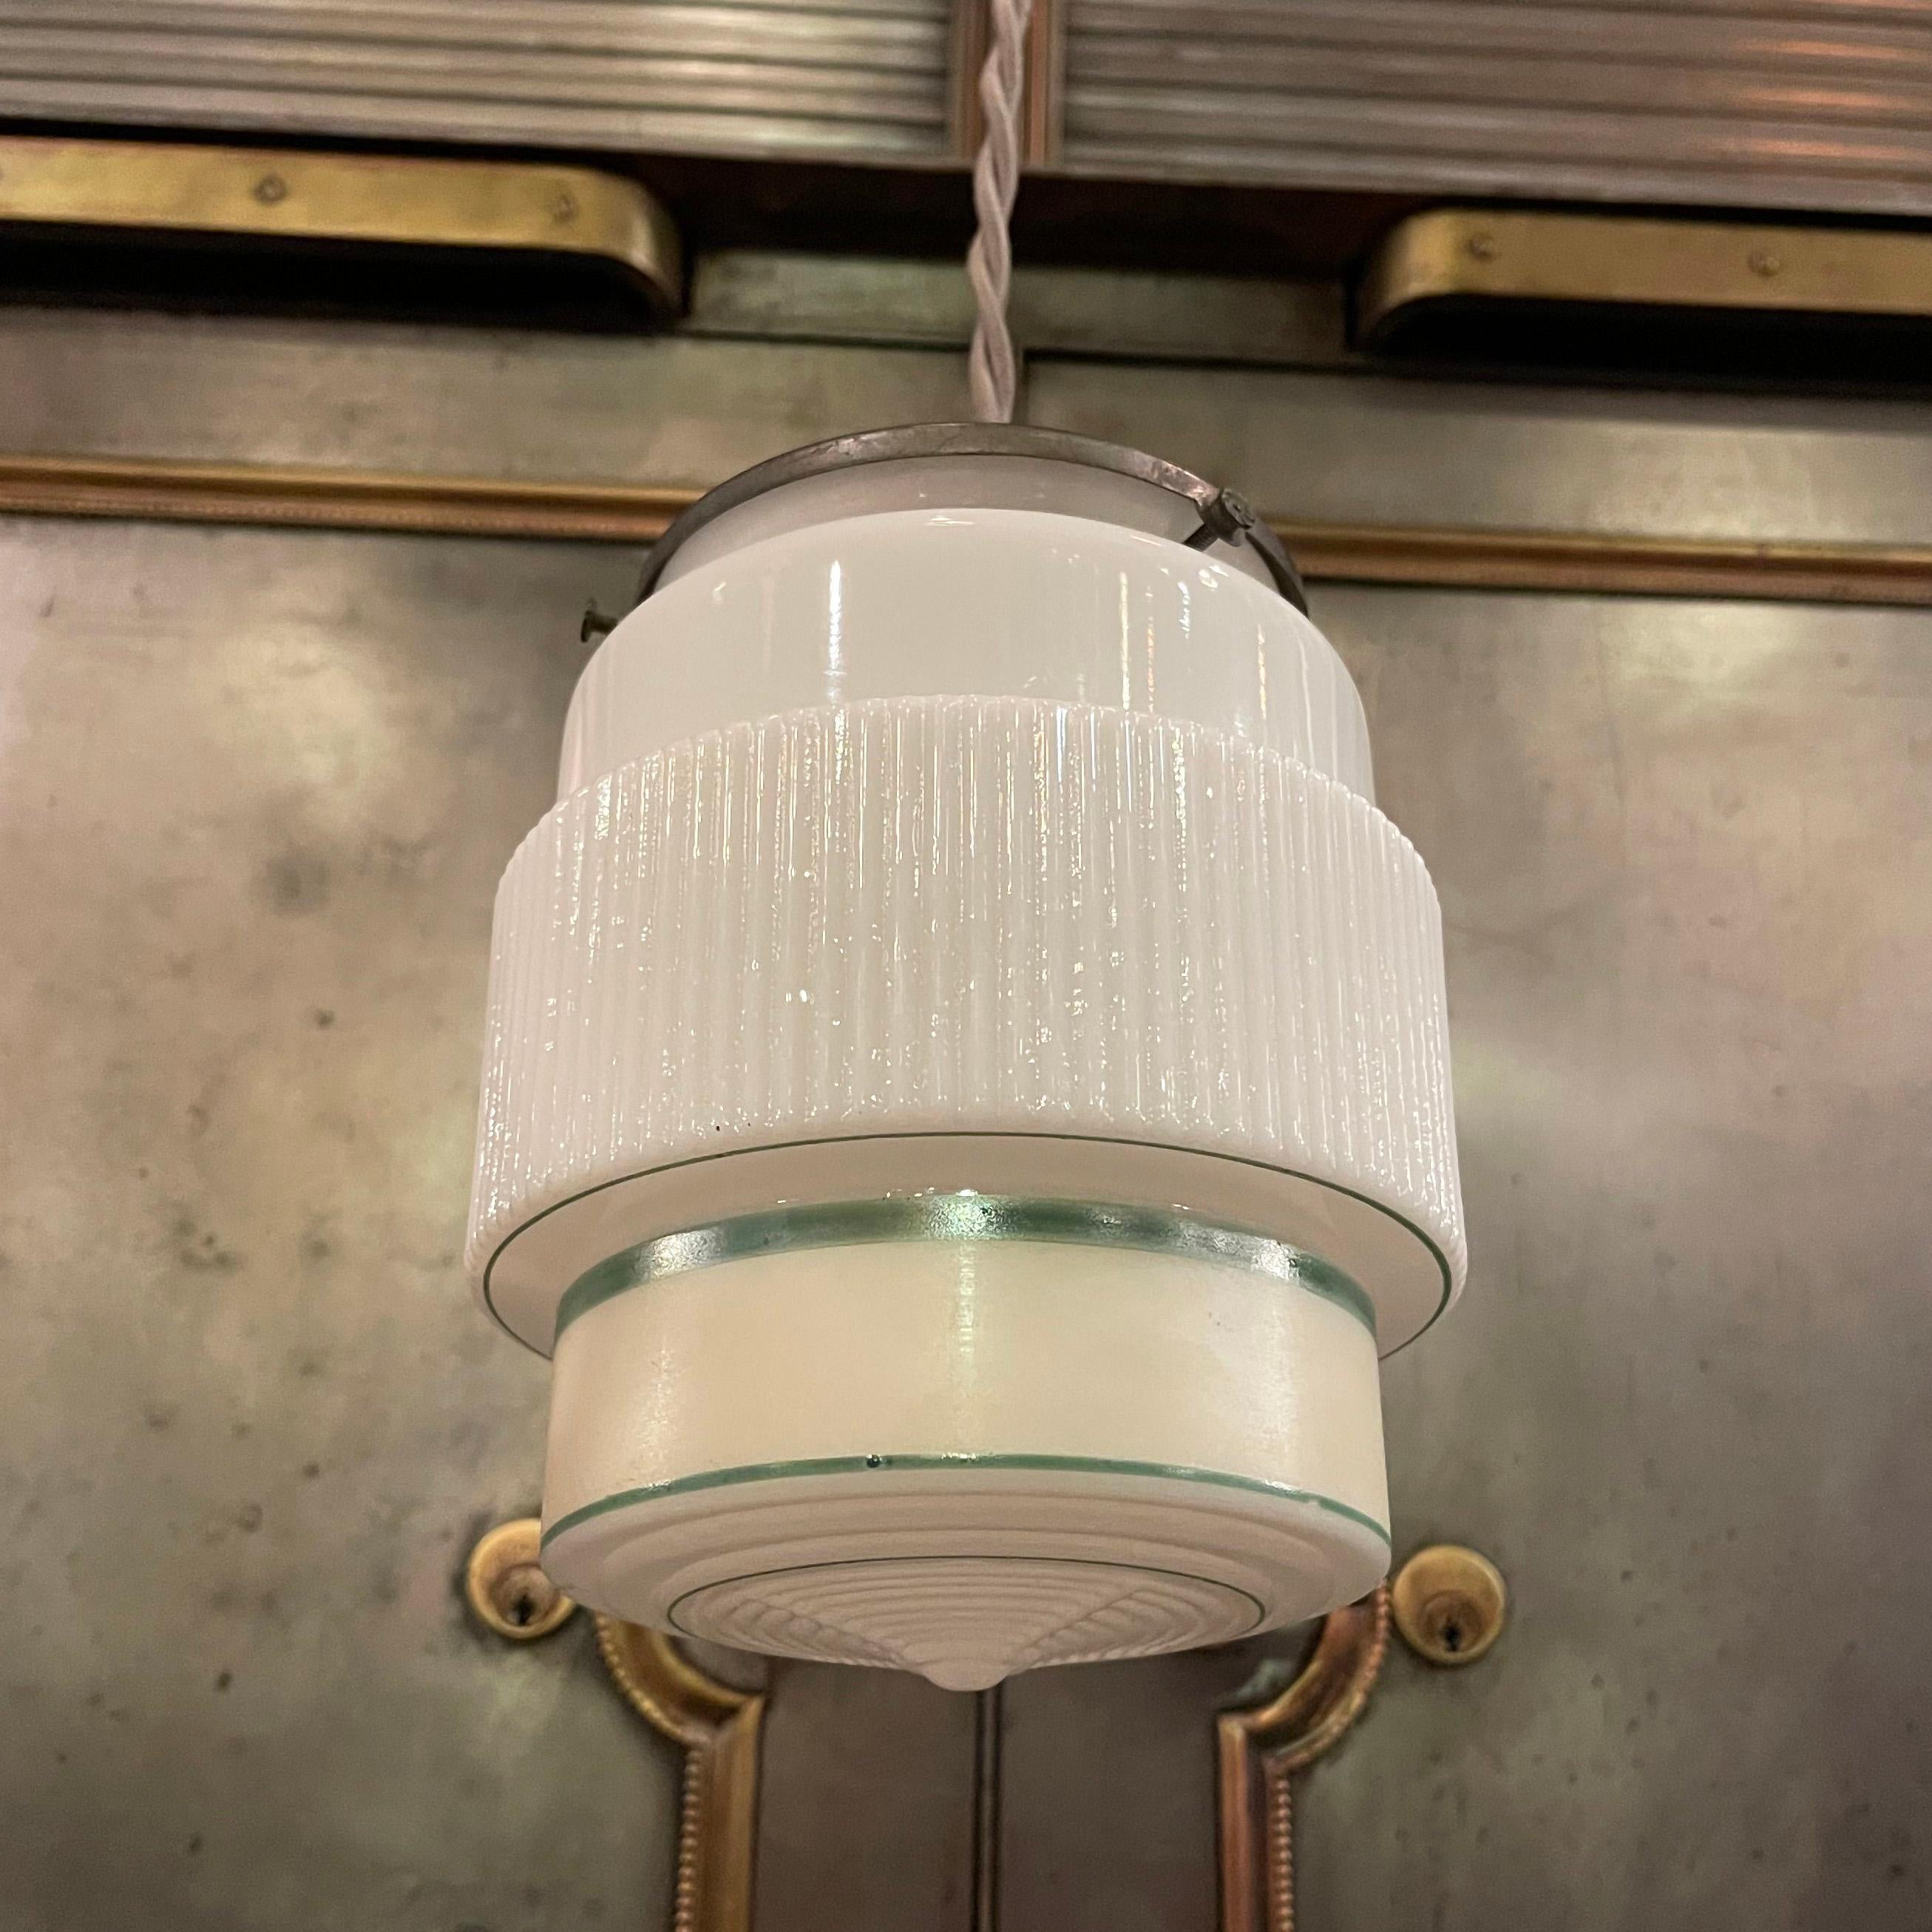 Art Deco pendant light with a layer cake, green stripe, milk glass shade and gunmetal hardware is newly wired with 48 inches of gray braided cloth cord.